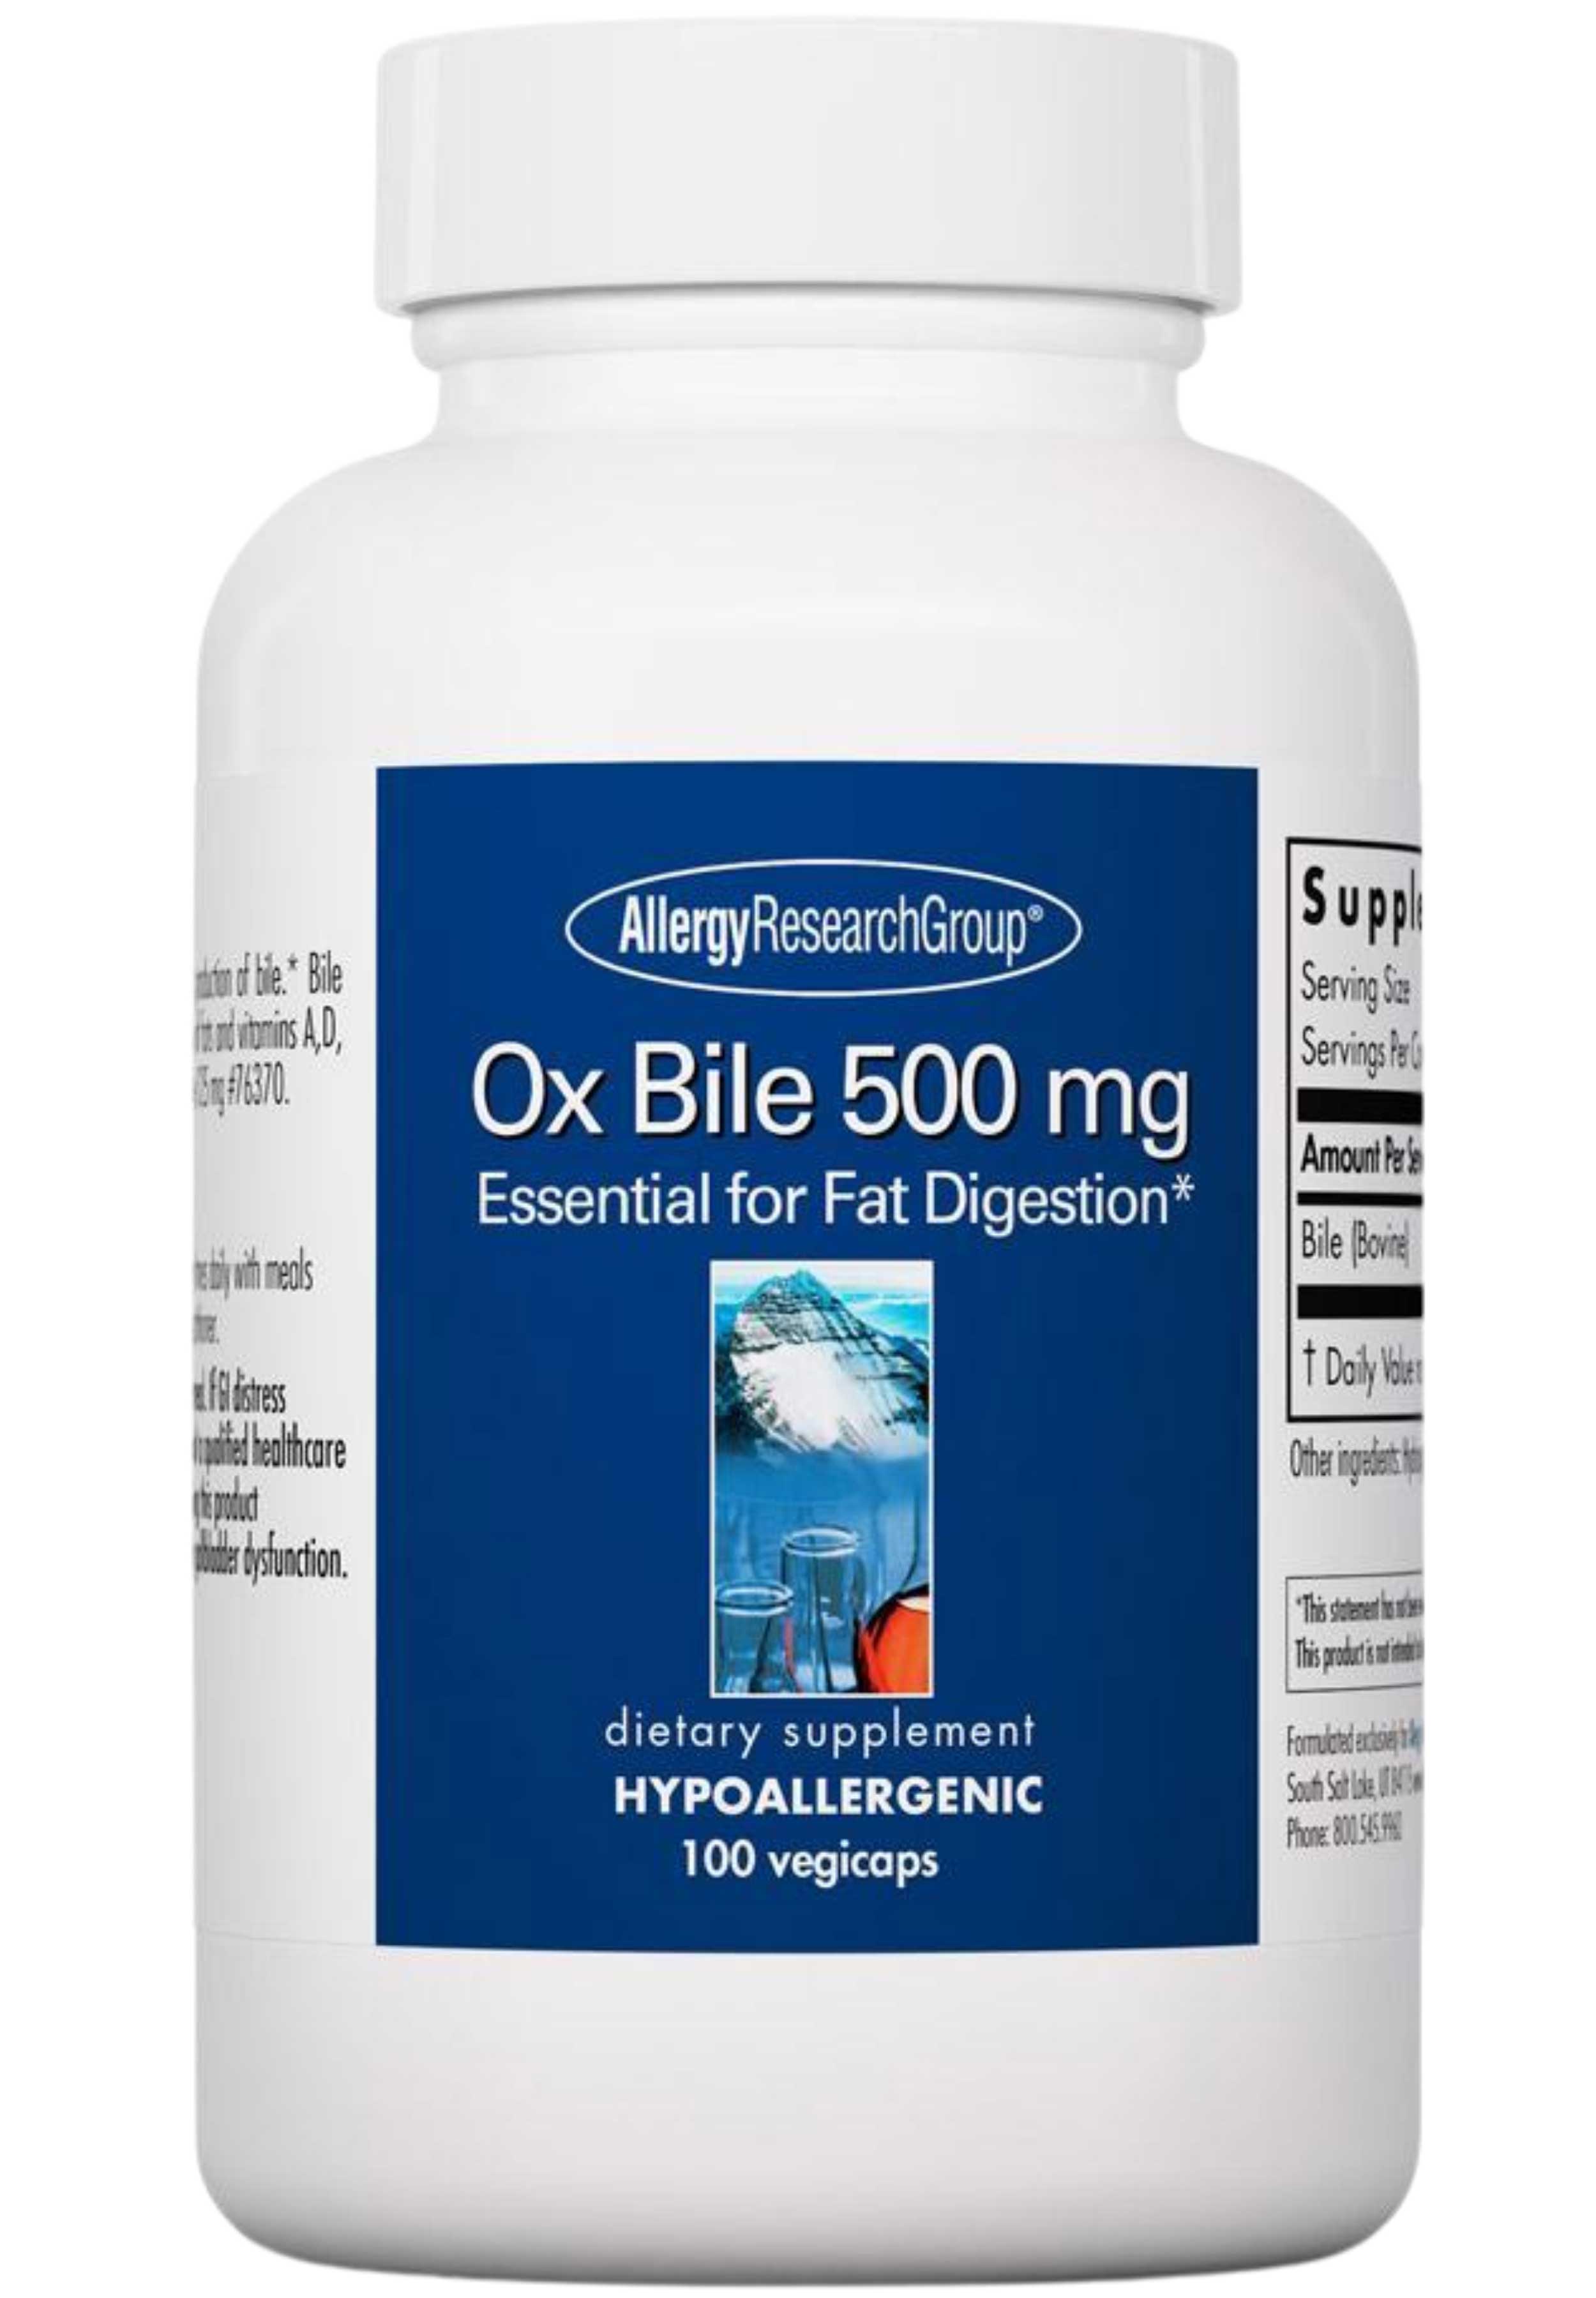 Allergy Research Group Ox Bile 500 mg